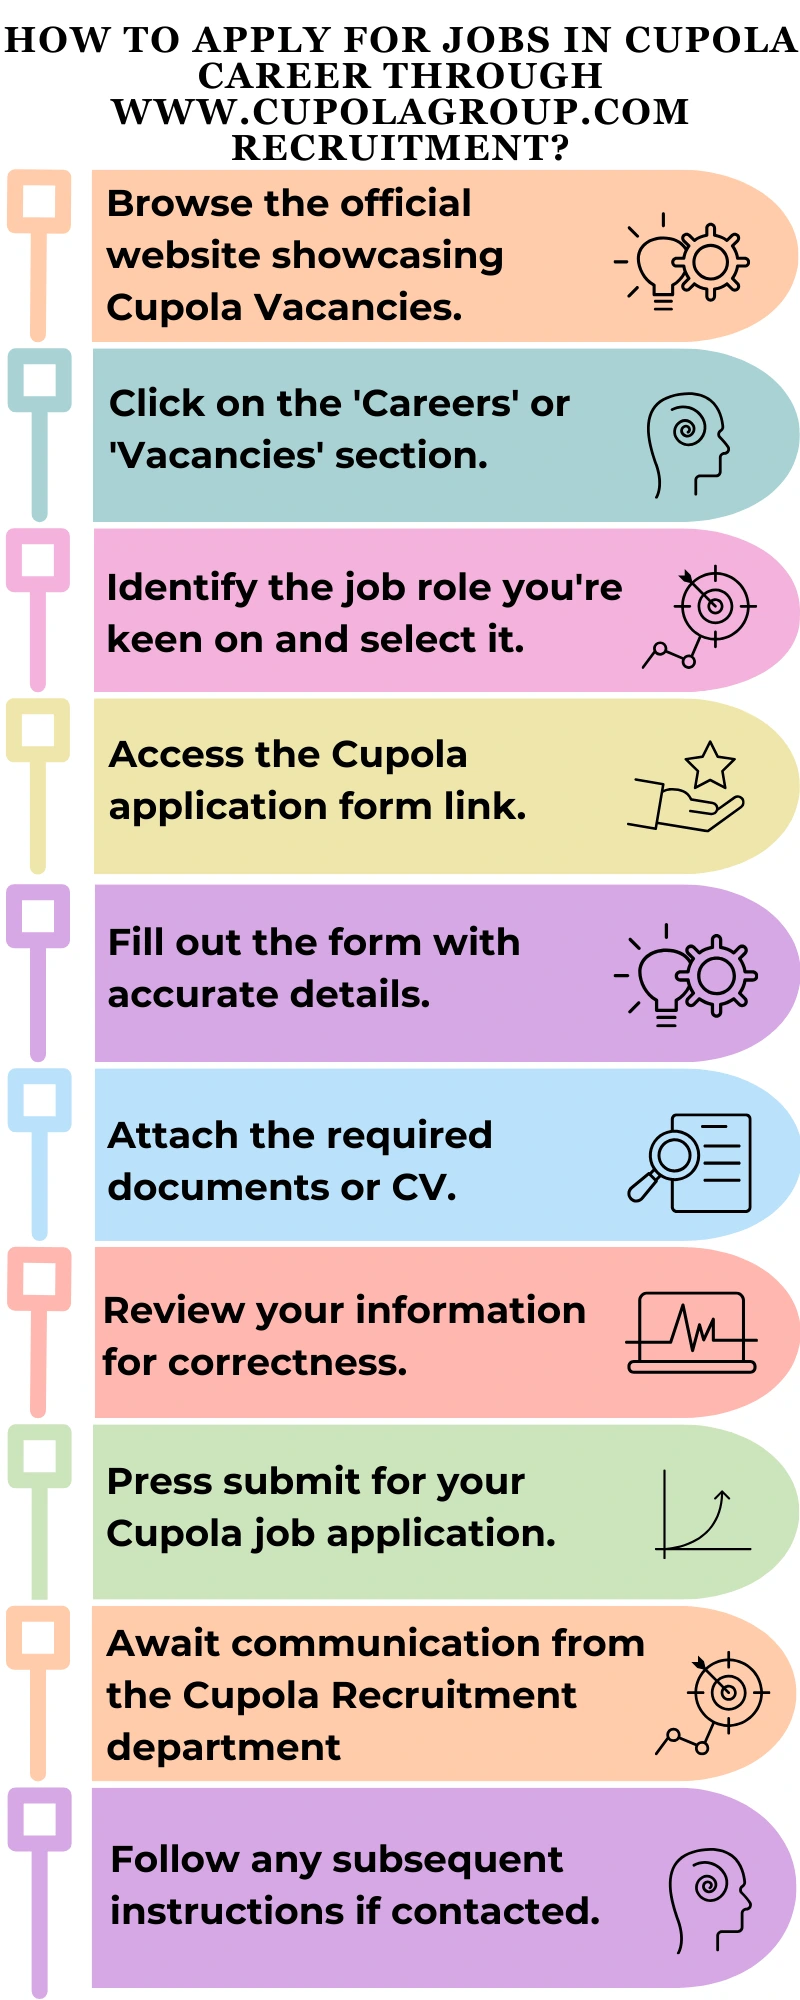 How to Apply for Jobs in Cupola Career through www.cupolagroup.com recruitment?